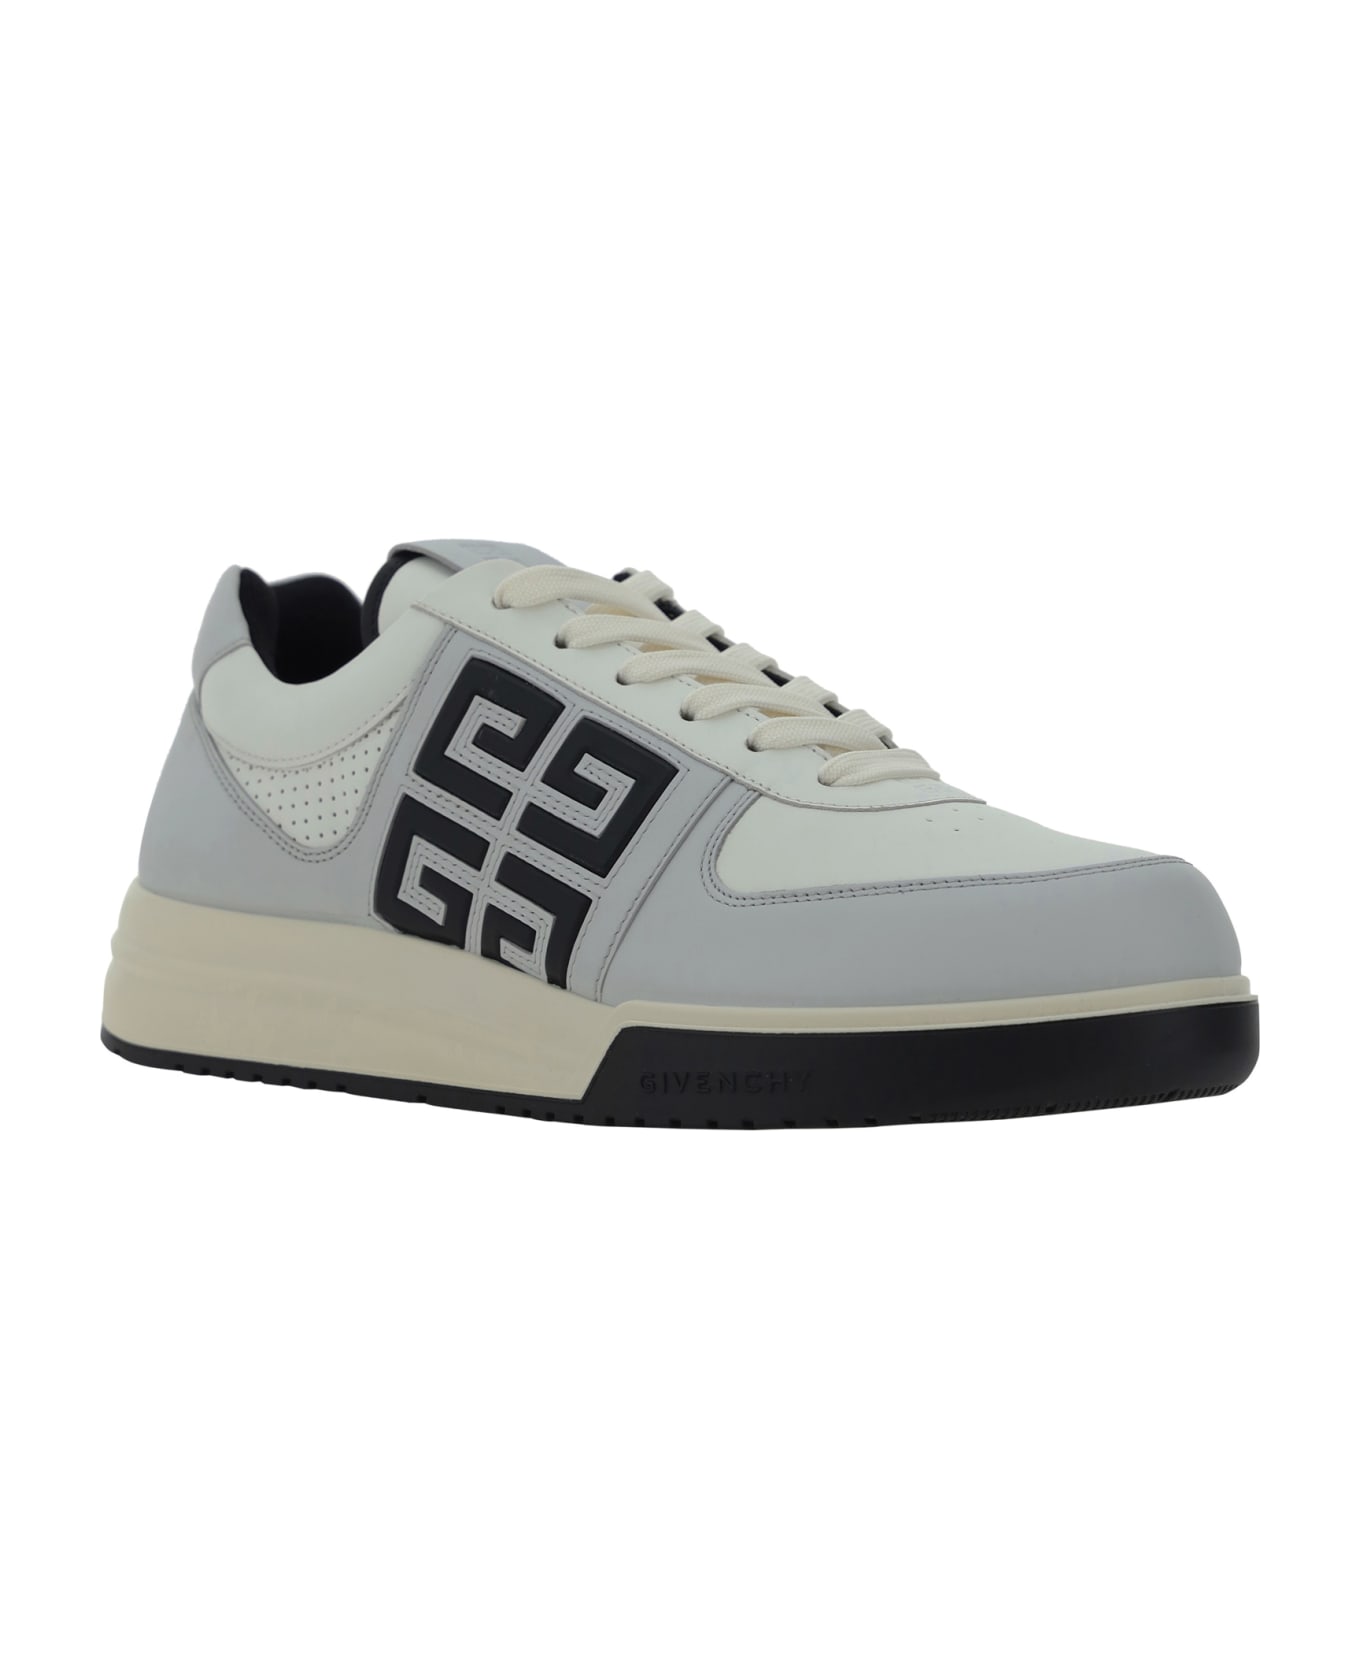 Givenchy G4 Low Top Sneakers - Grey/black